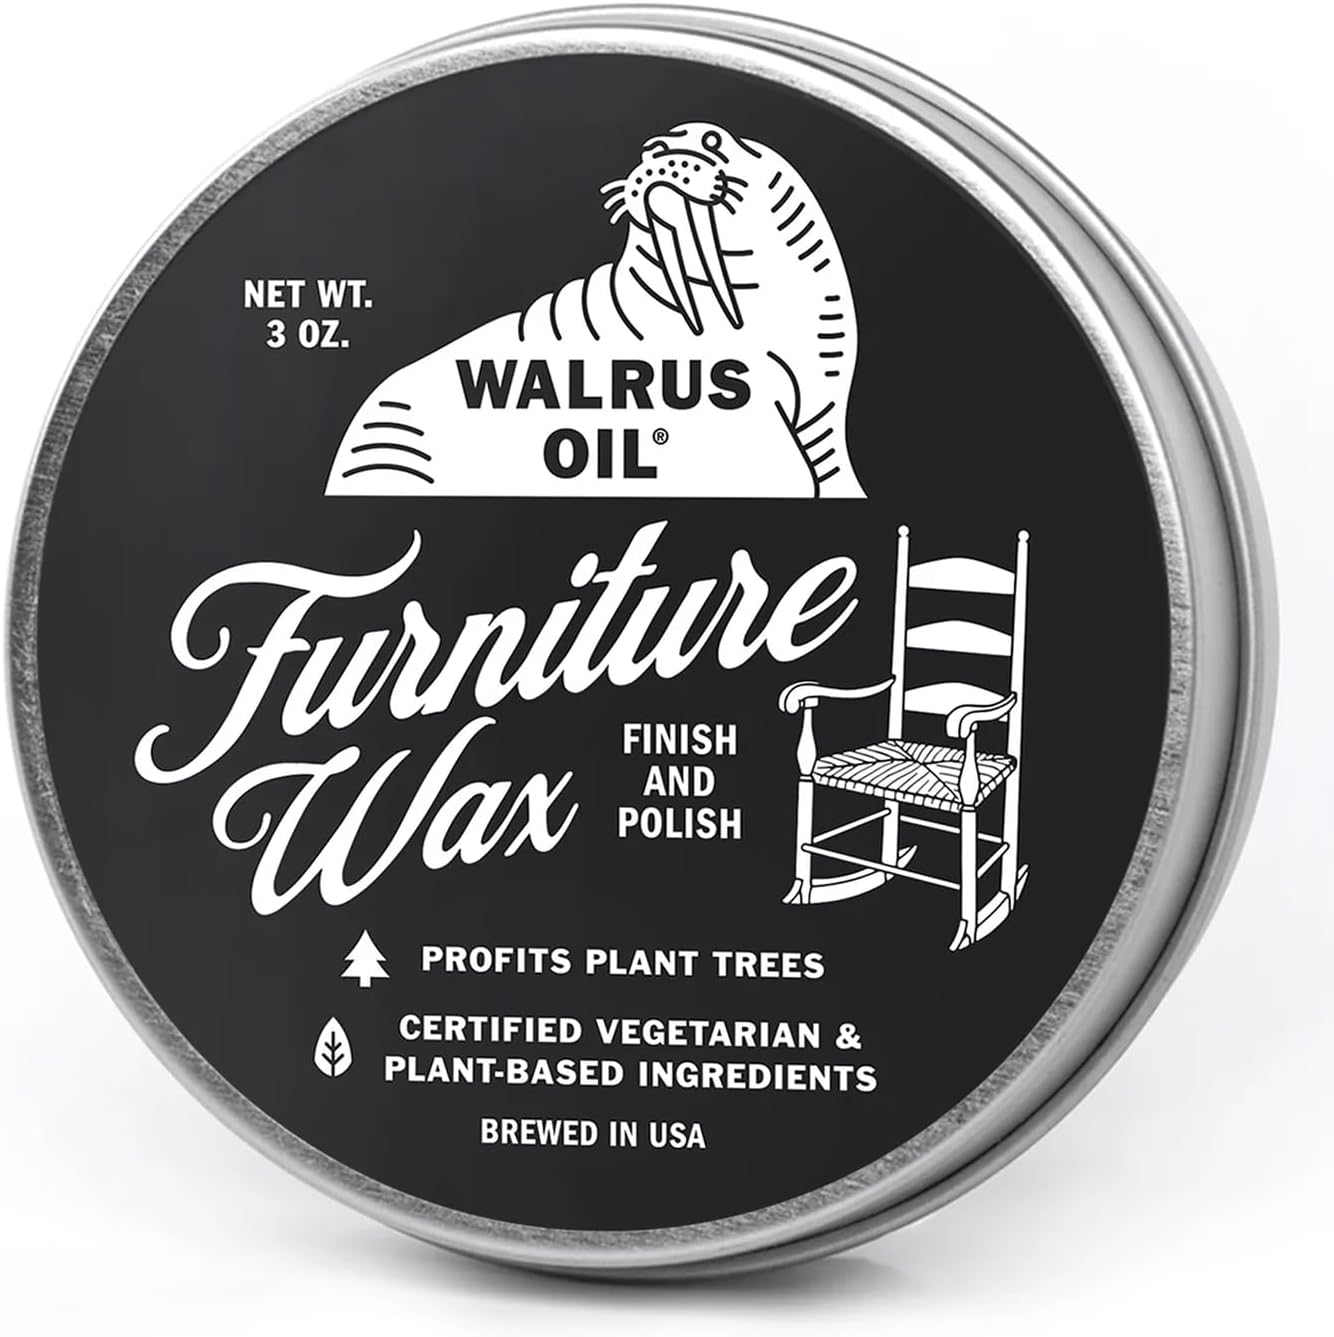 WALRUS OIL - Furniture Wax Polish - Easy to Use Wood Maintenance and Polishing Wax for Furniture and Wooden Surfaces. 3oz Can